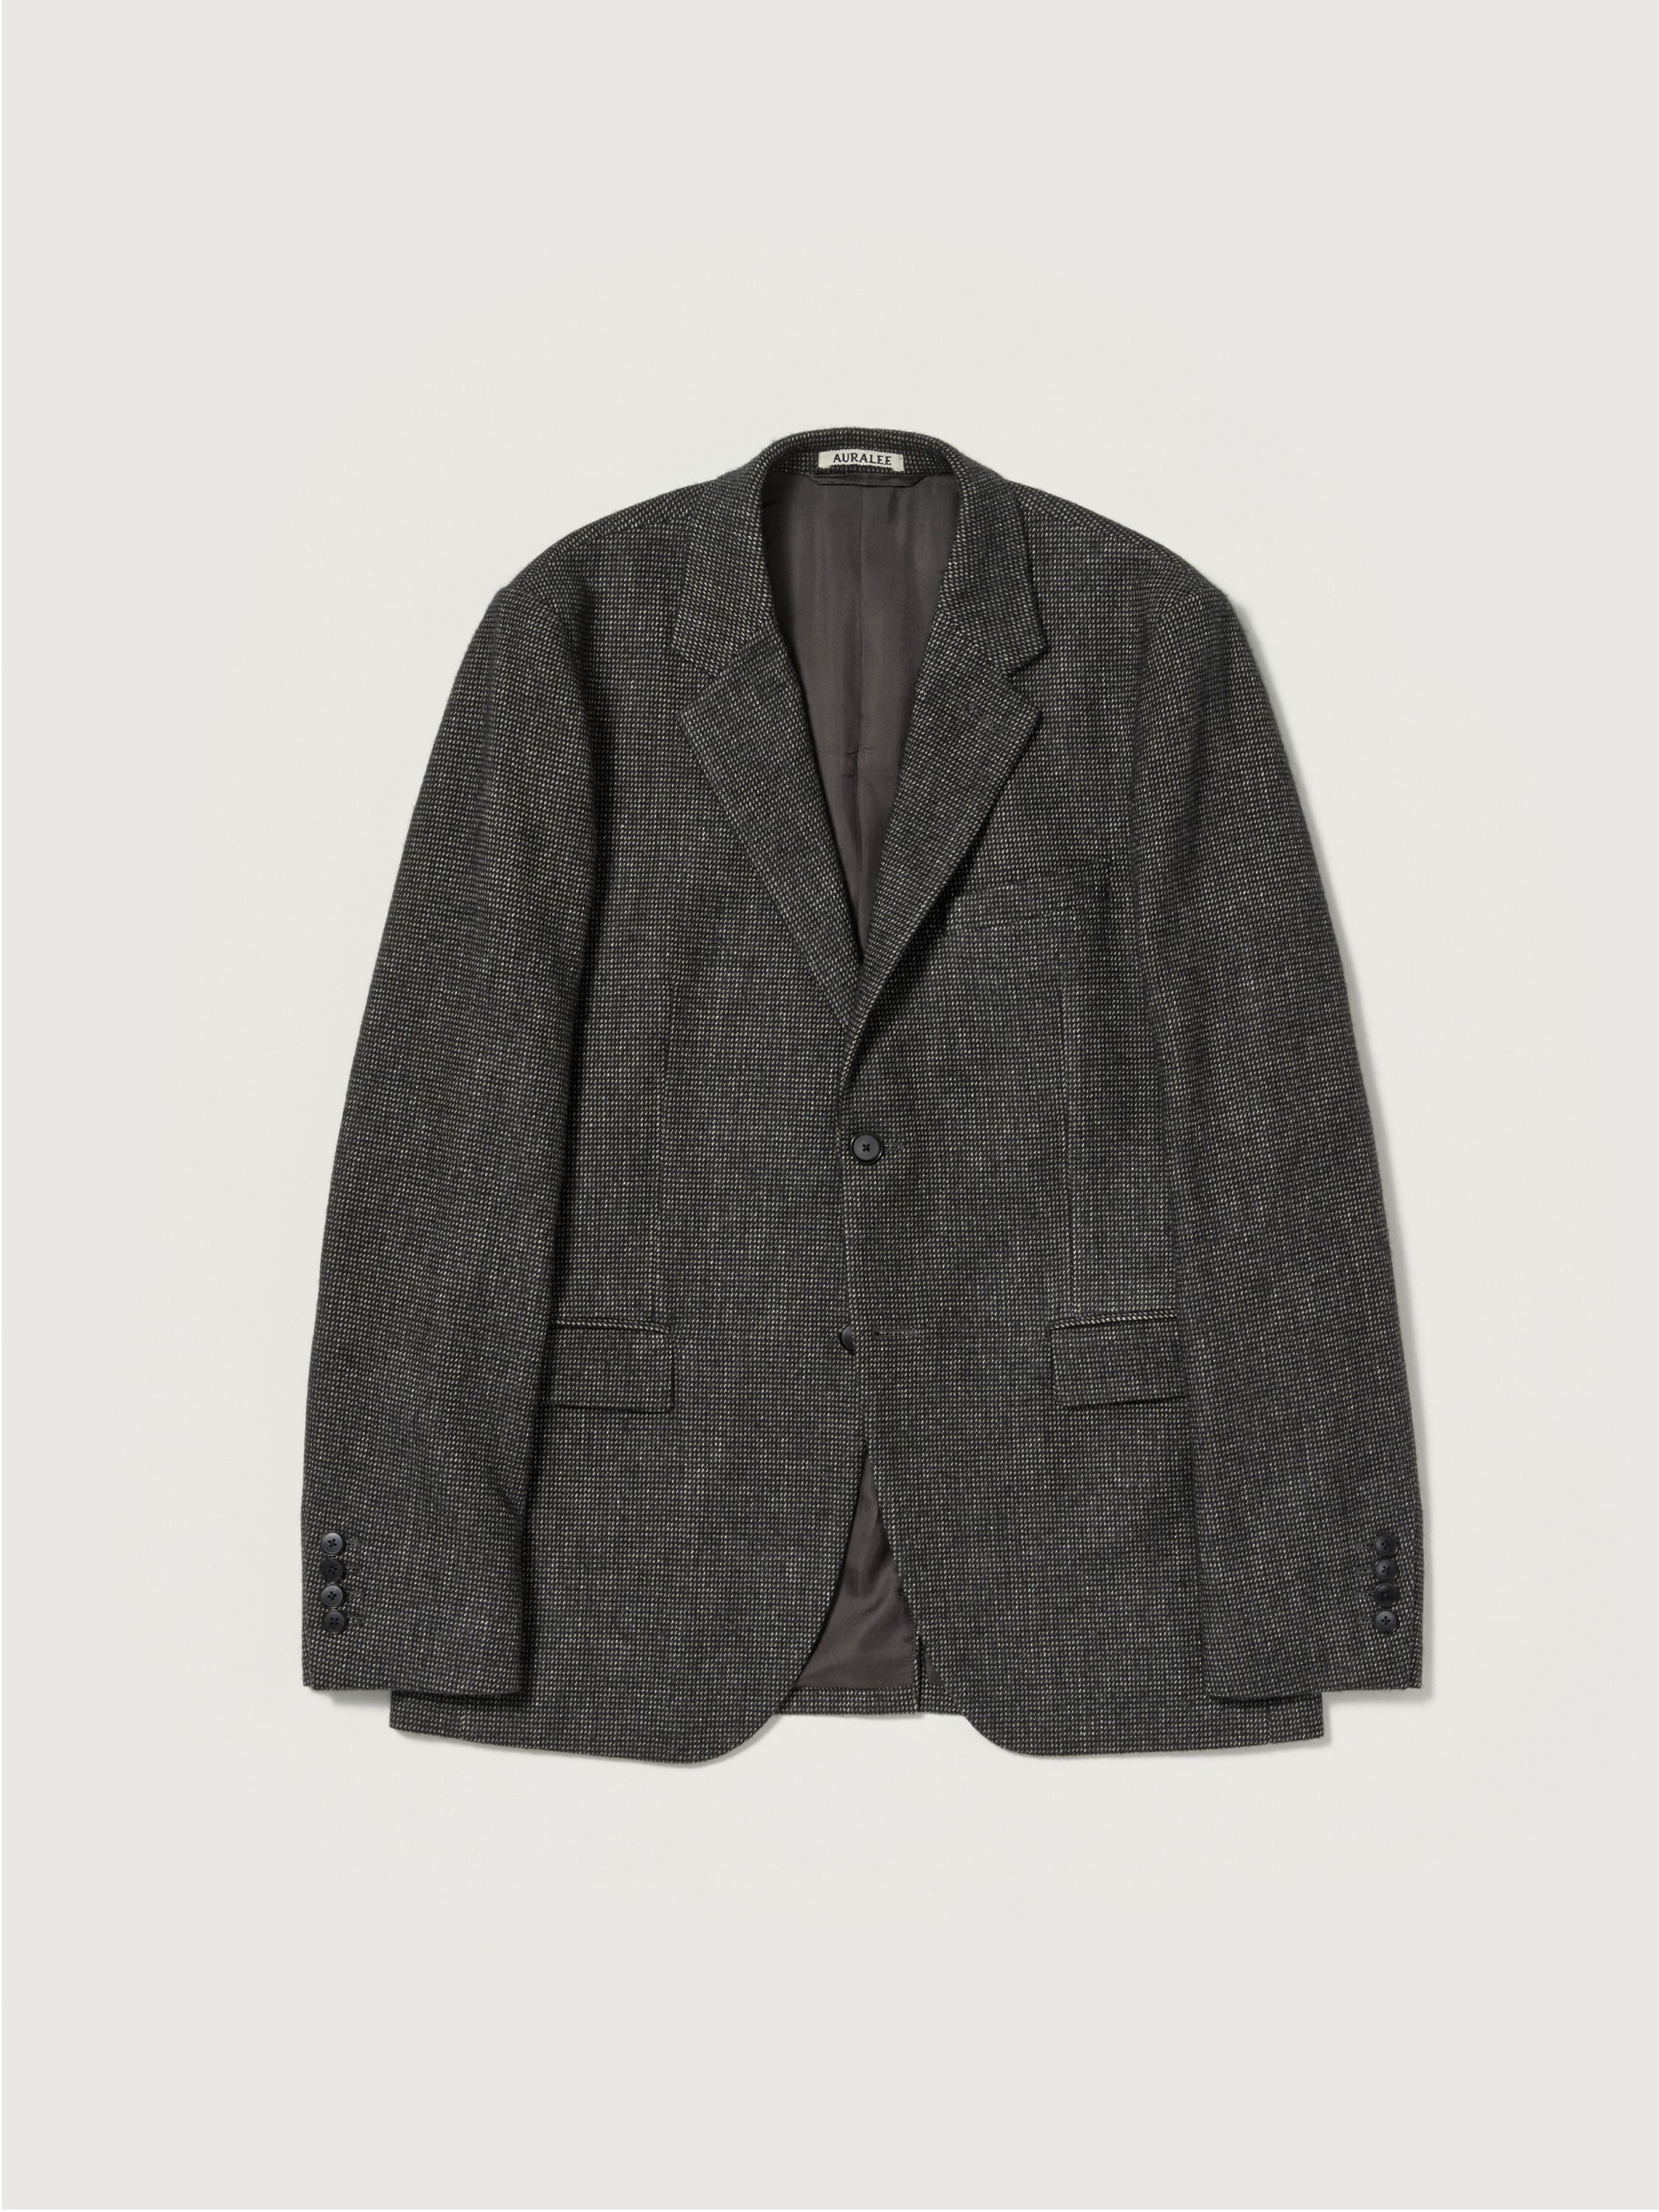 ORGANIC COTTON CASHMERE WOOL TWEED JACKET 詳細画像 TOP CHARCOAL 5